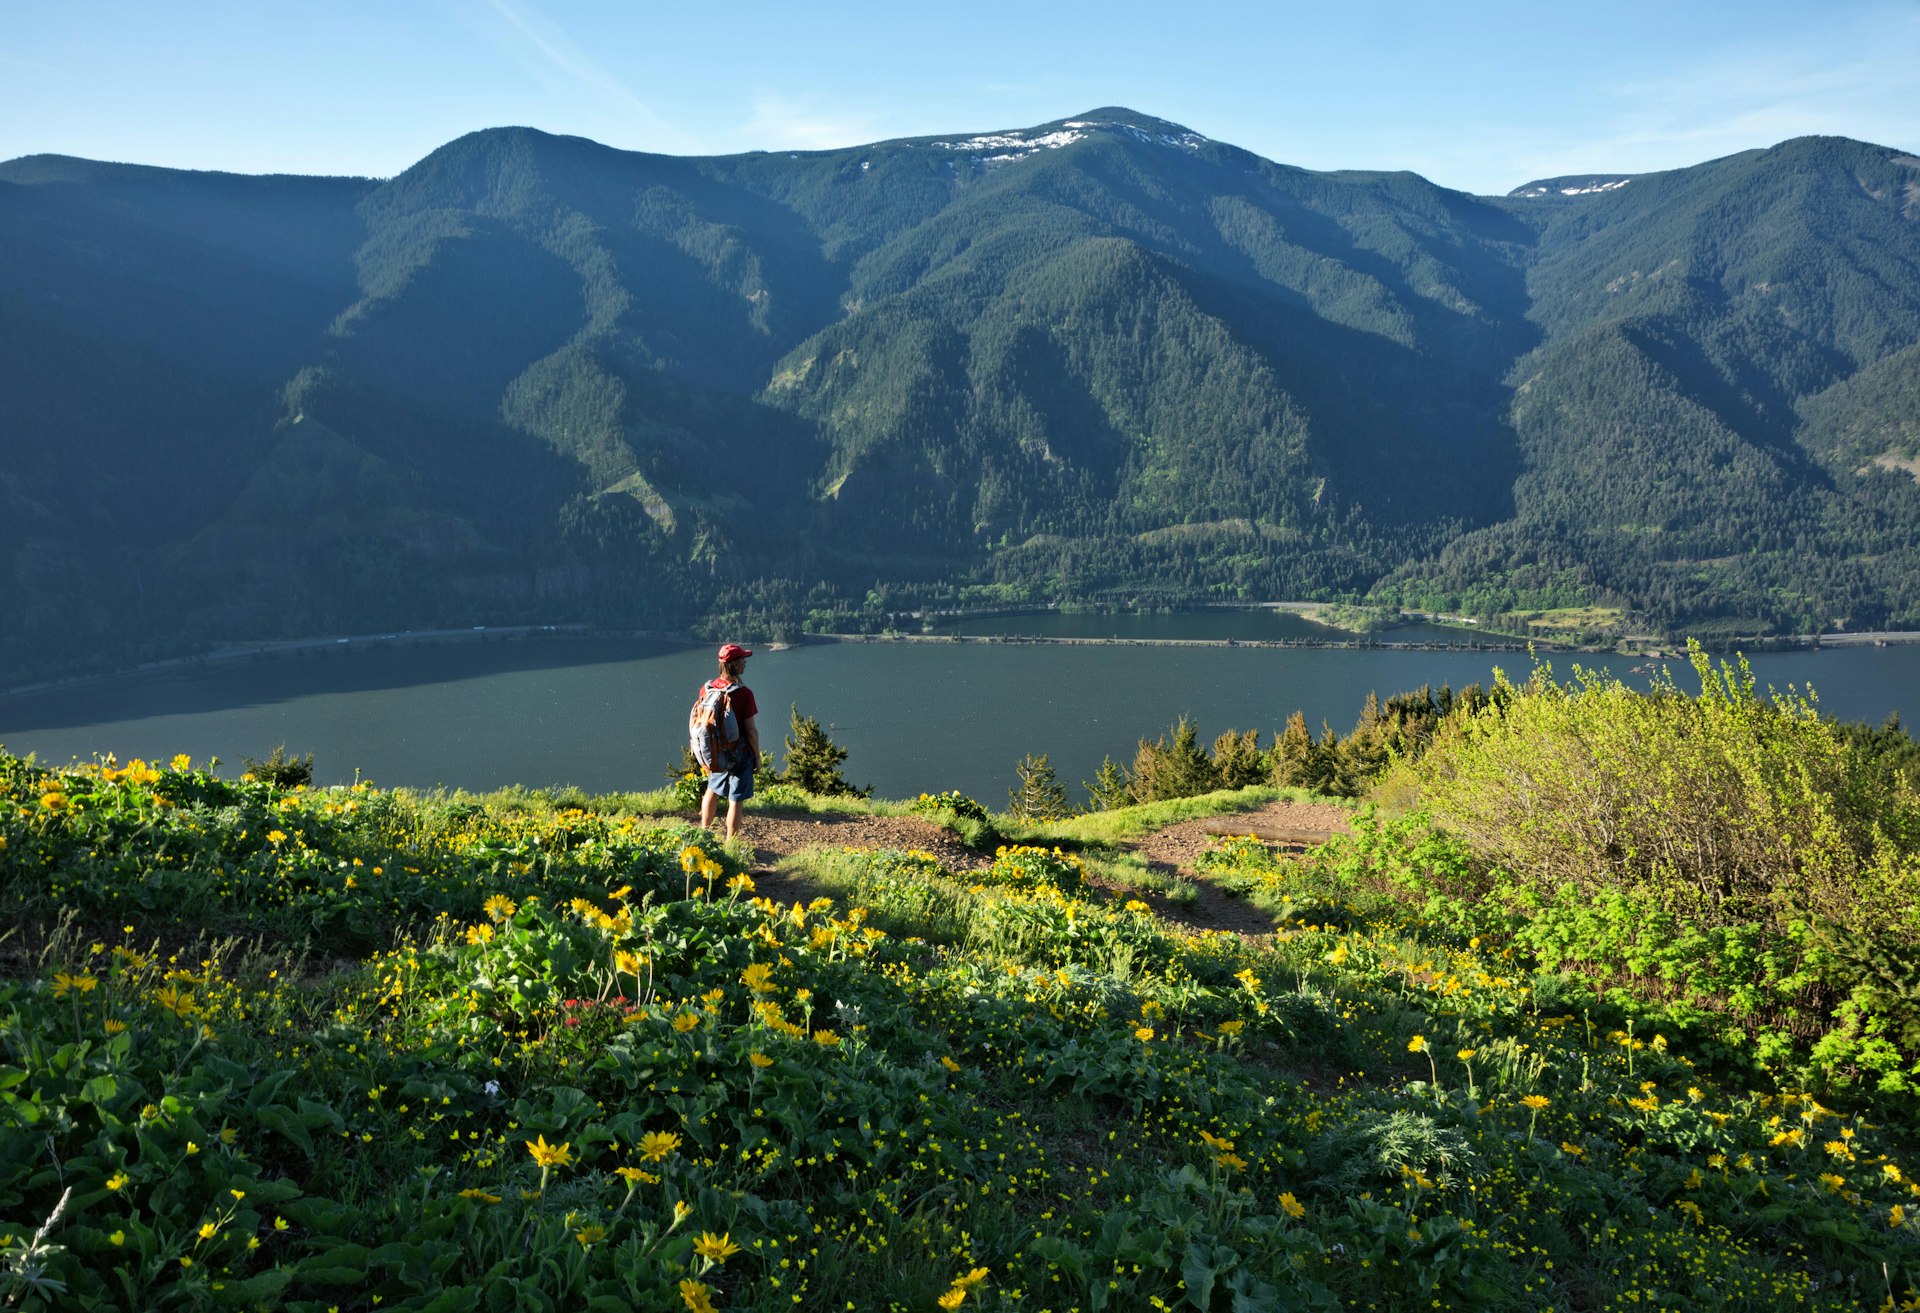 WASHINGTON - Hiker overlooking the Columbia River from the Dog Mountain Trail in the Columbia River Gorge National Scenic Area.